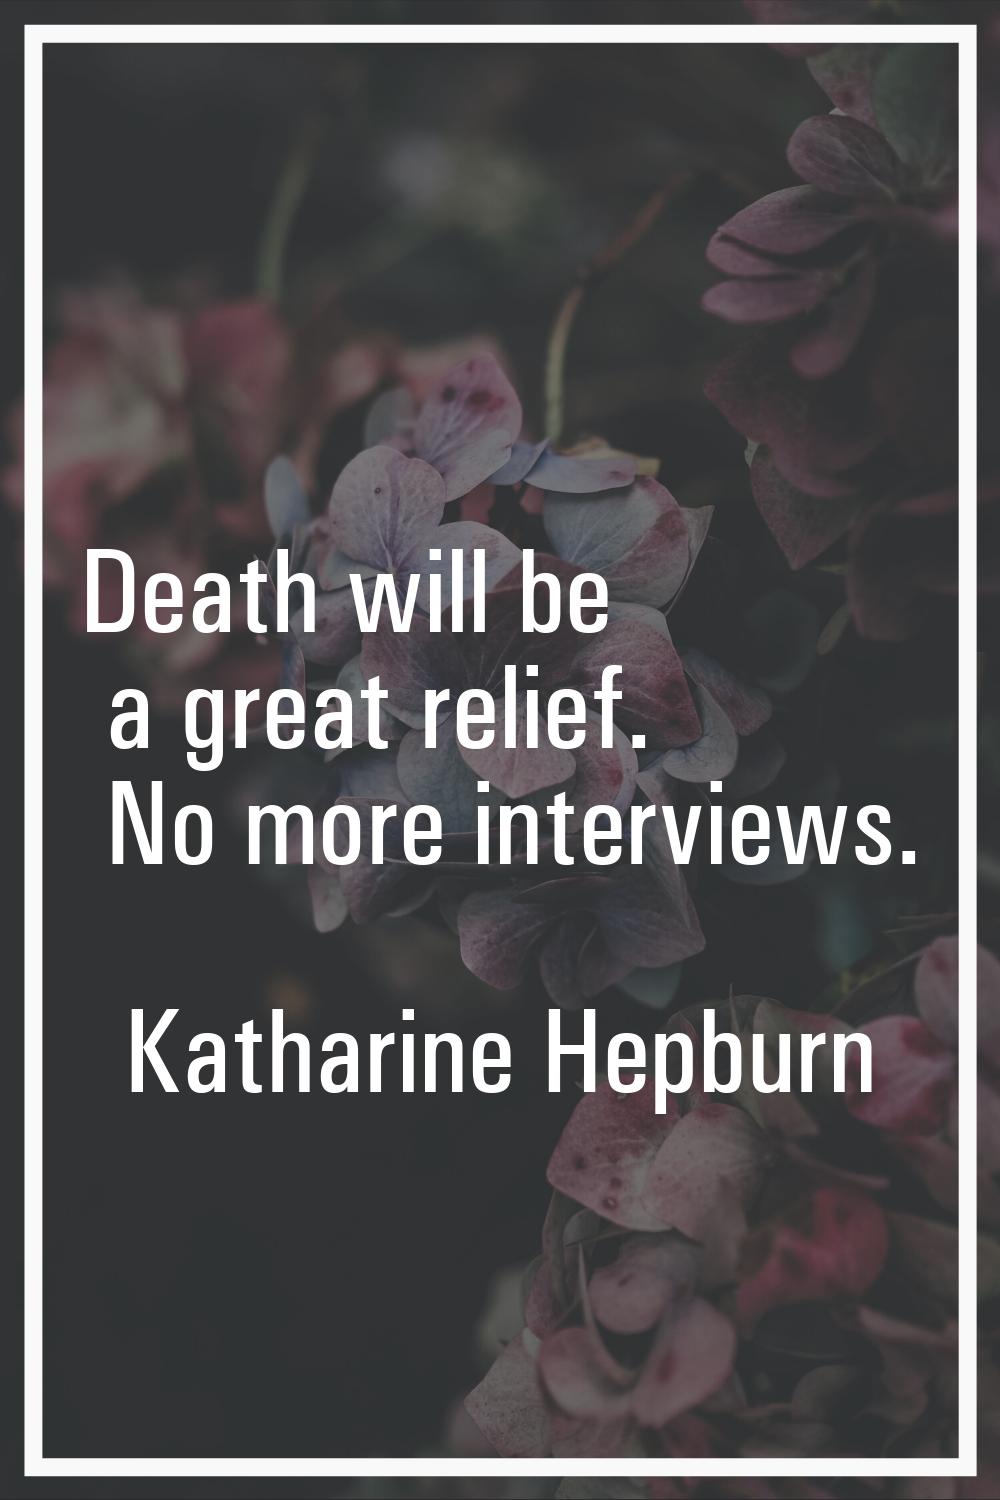 Death will be a great relief. No more interviews.